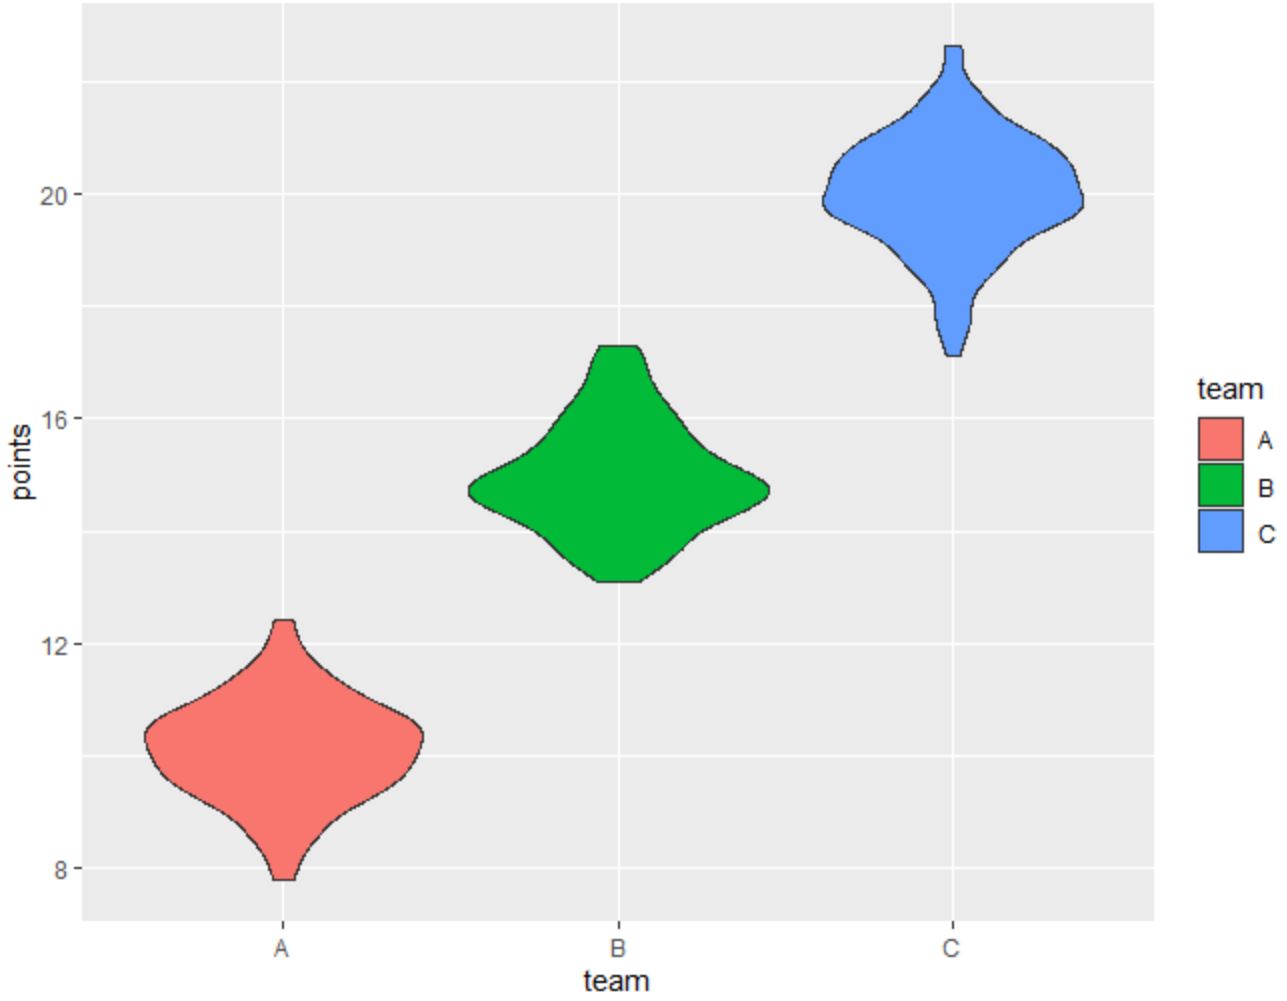 How To Create A Violin Plot In Ggplot With Examples Online Statistics Library